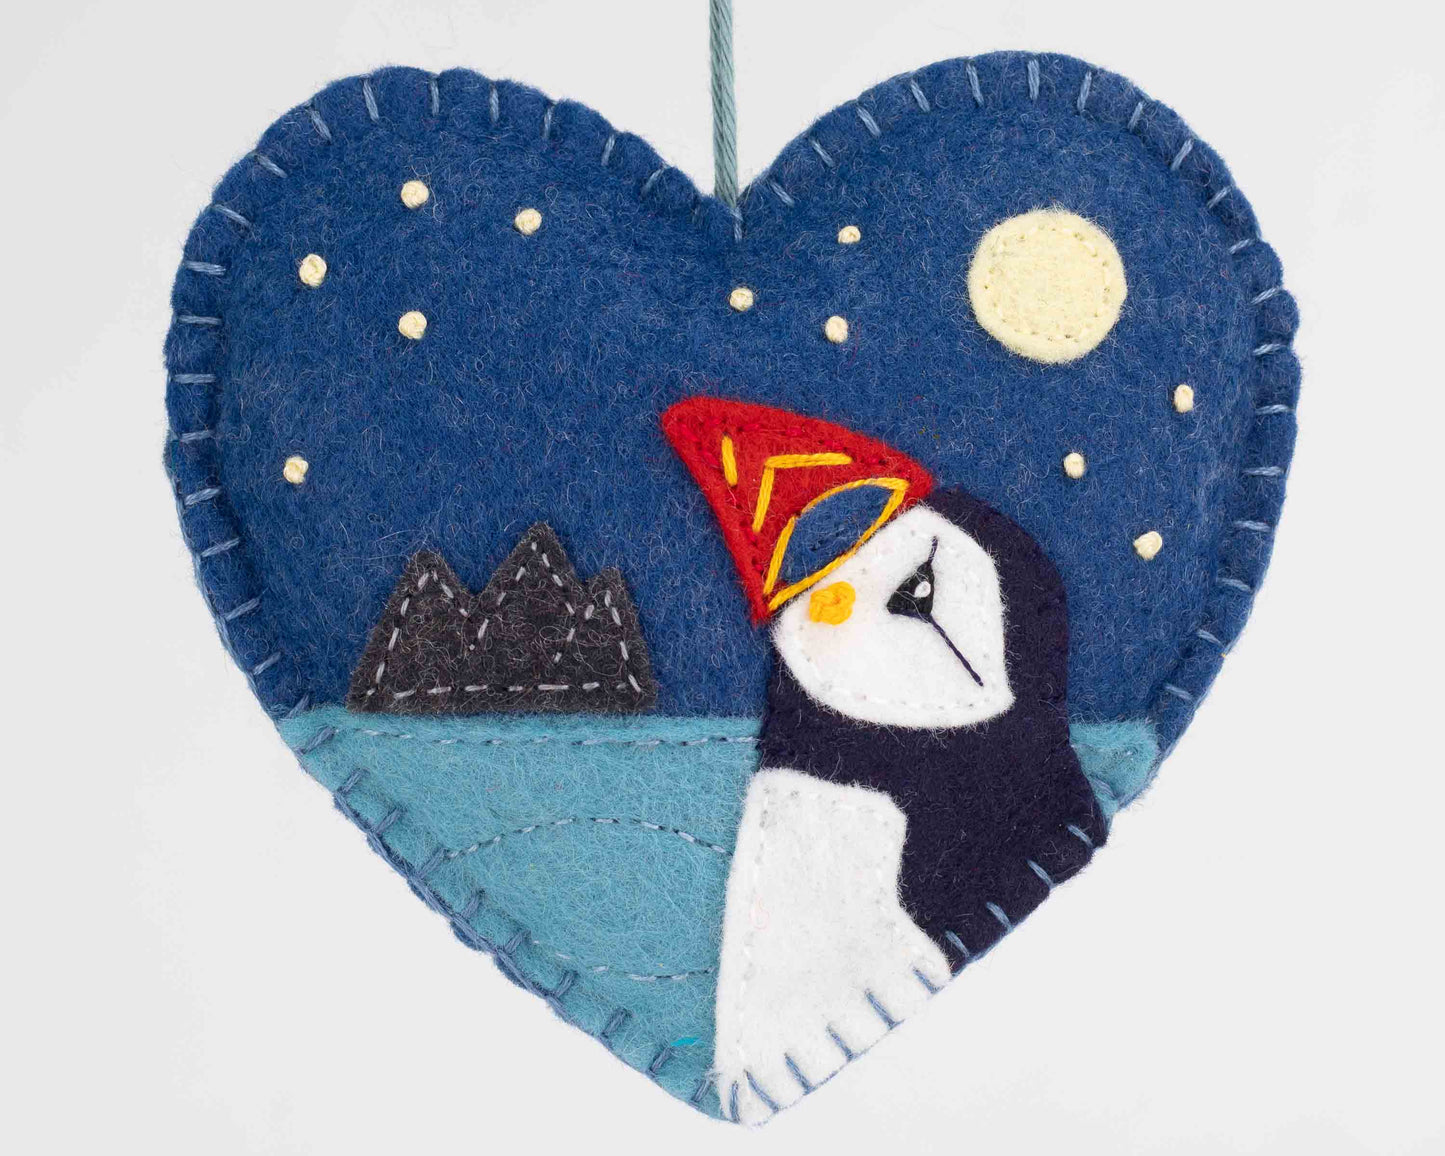 Embroidered Felt Puffin Heart Ornament